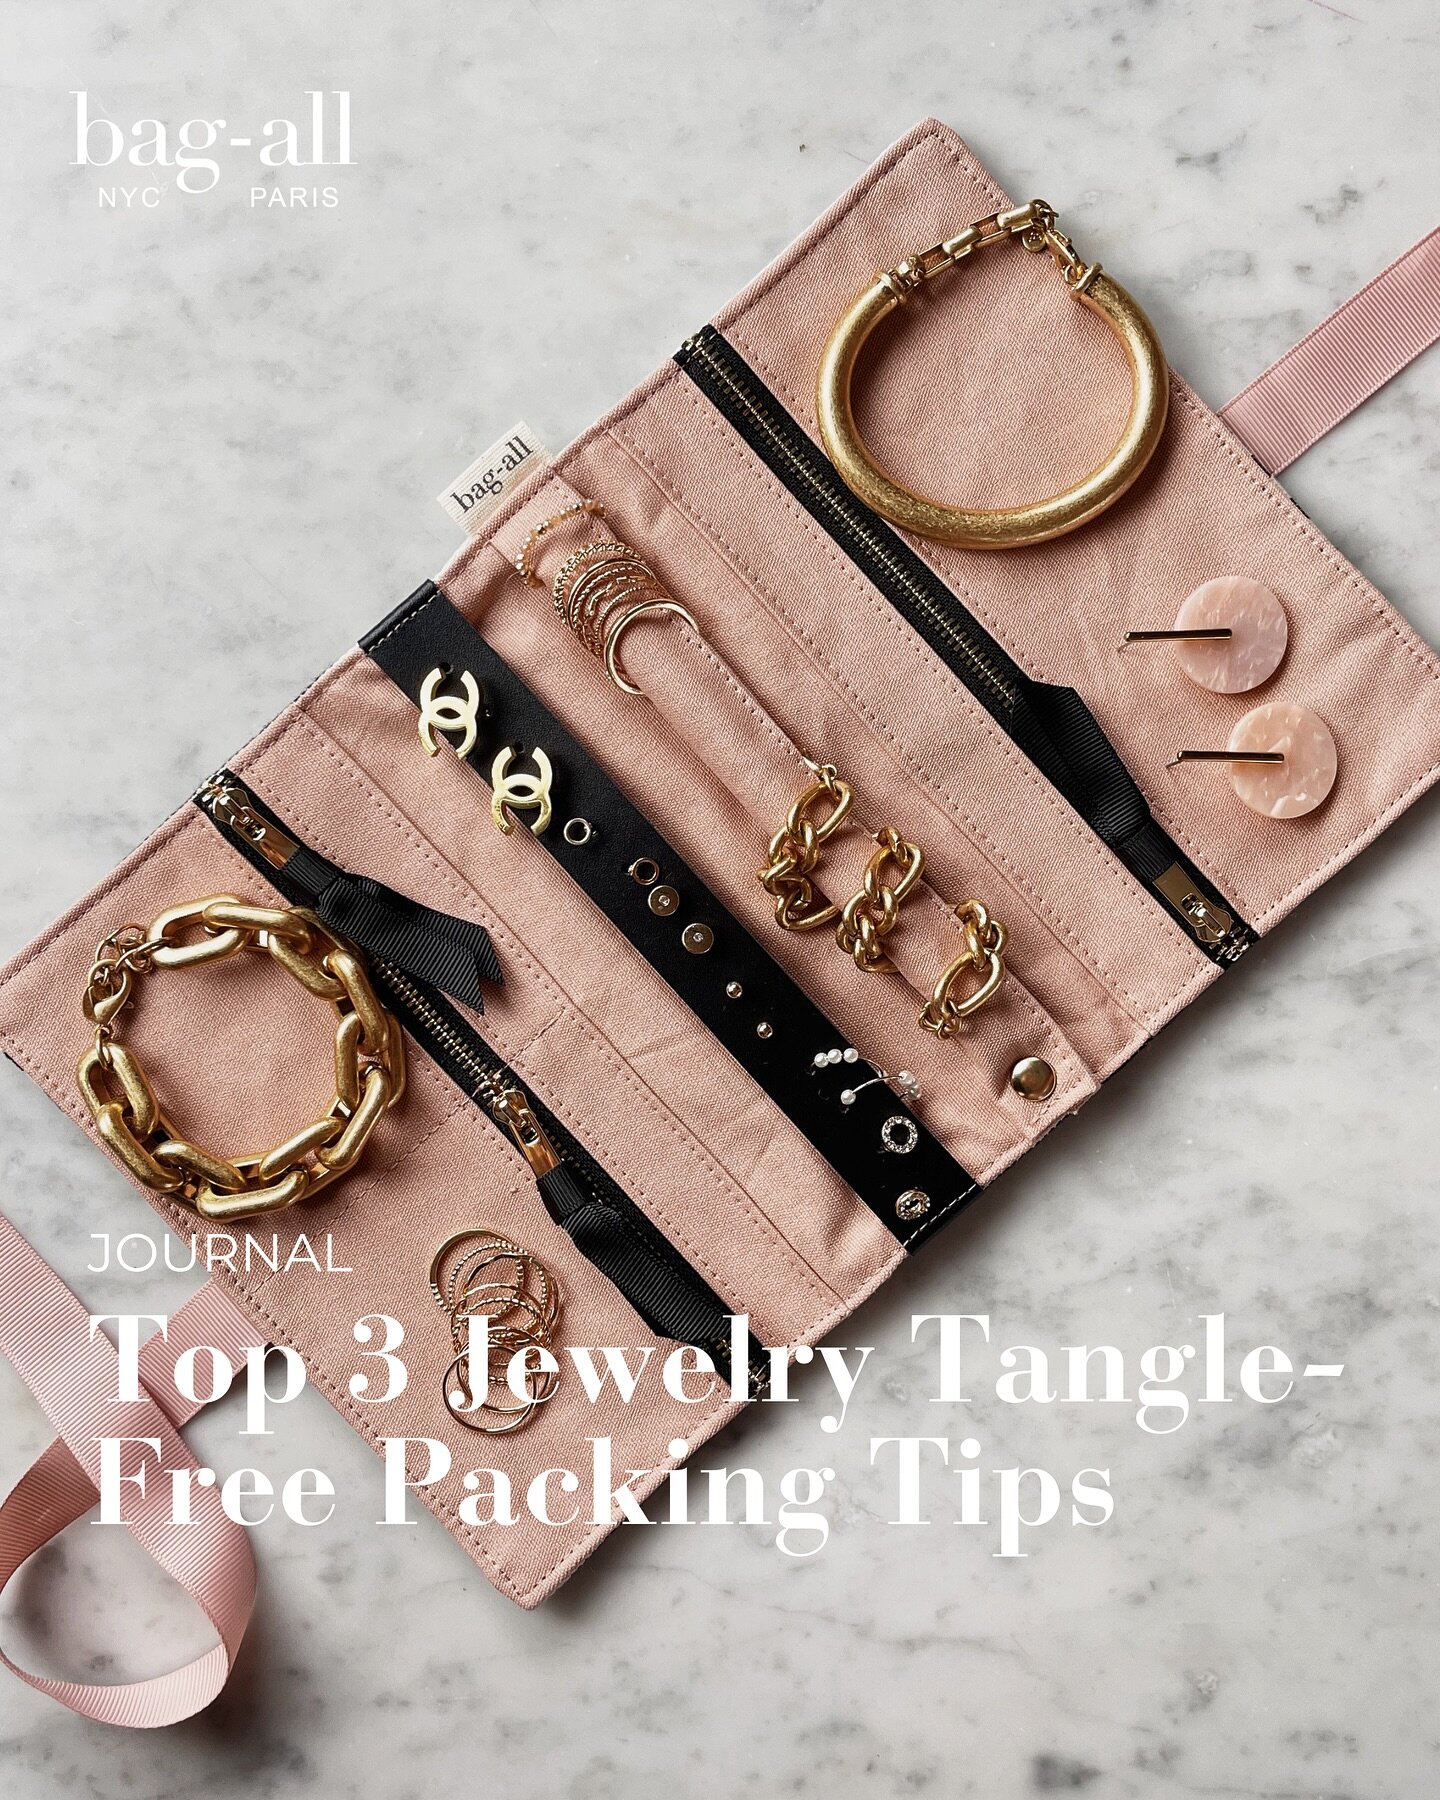 Revealing the secrets to tangle-free jewelry packing!💍✨ Head to our journal website for the full scoop on keeping your precious accessories organized and ready to shine wherever you go.

www.bag-all-journal.com

In frame: Jewelry Roll, Travel Pouch 